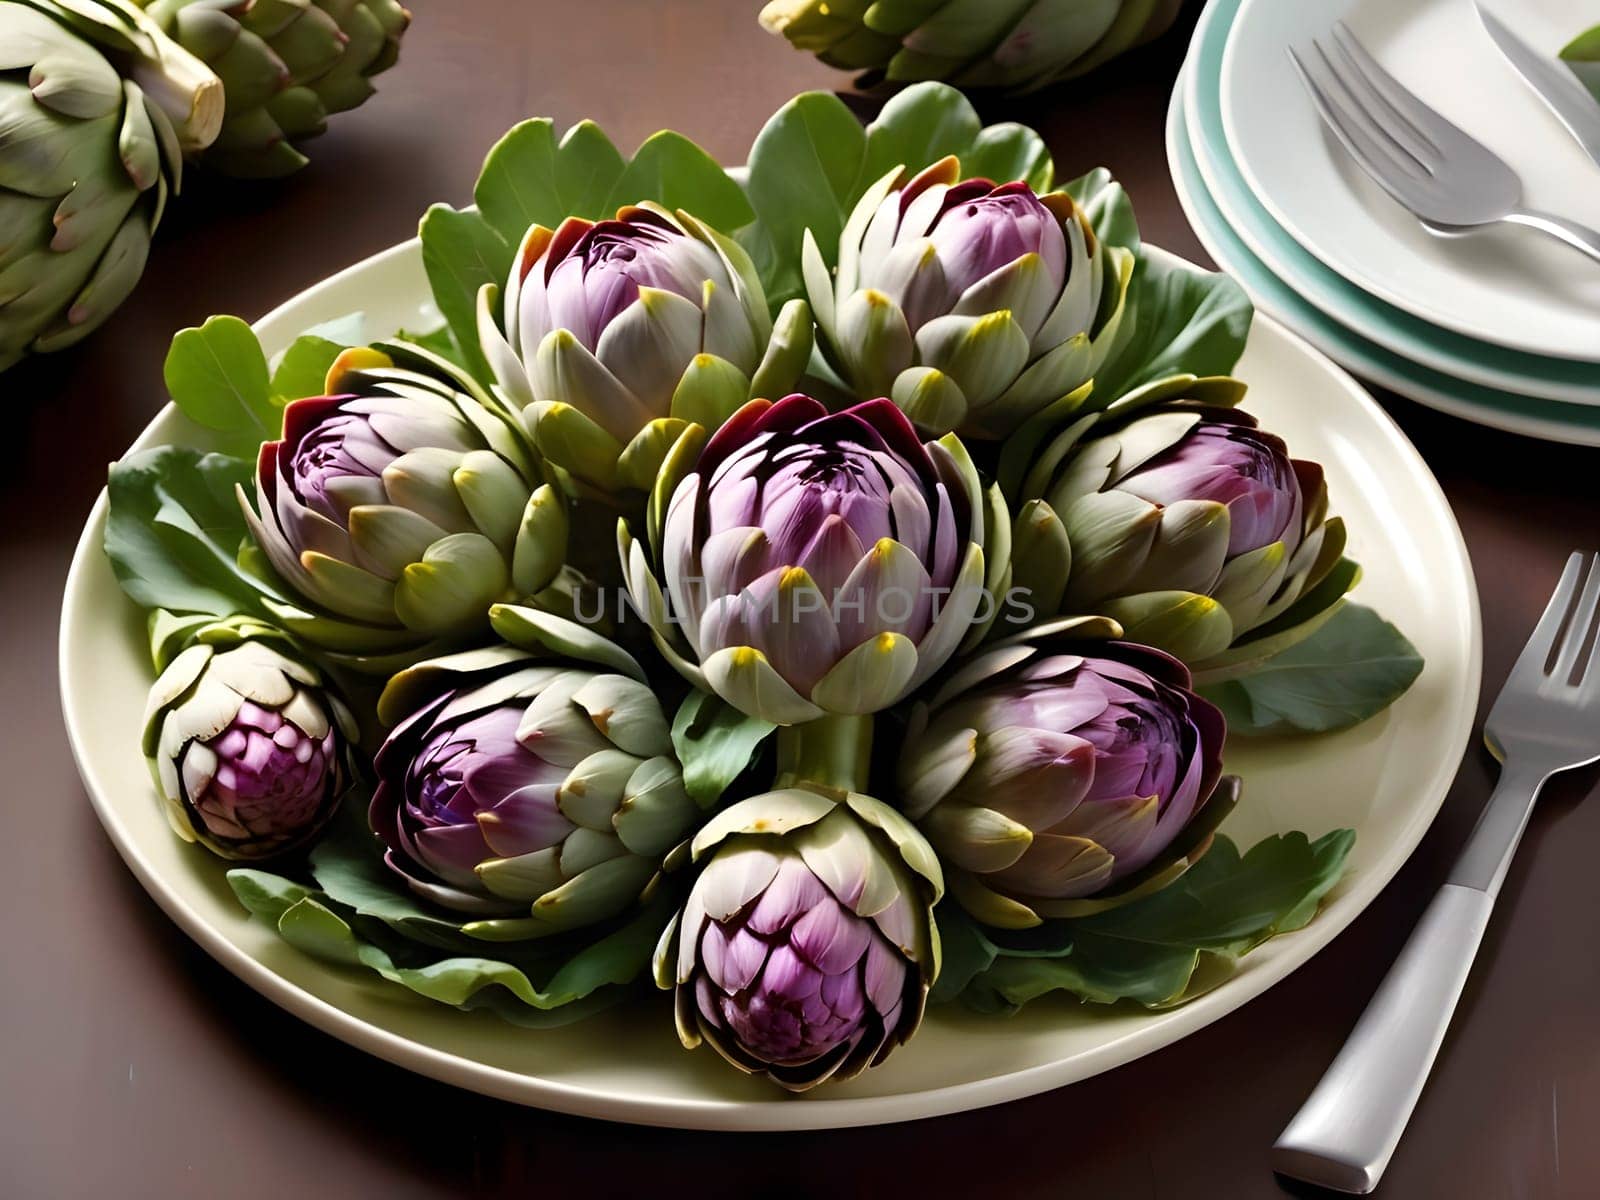 Artichoke Alchemy: Crafting Delicious Dishes for Health and Flavor.